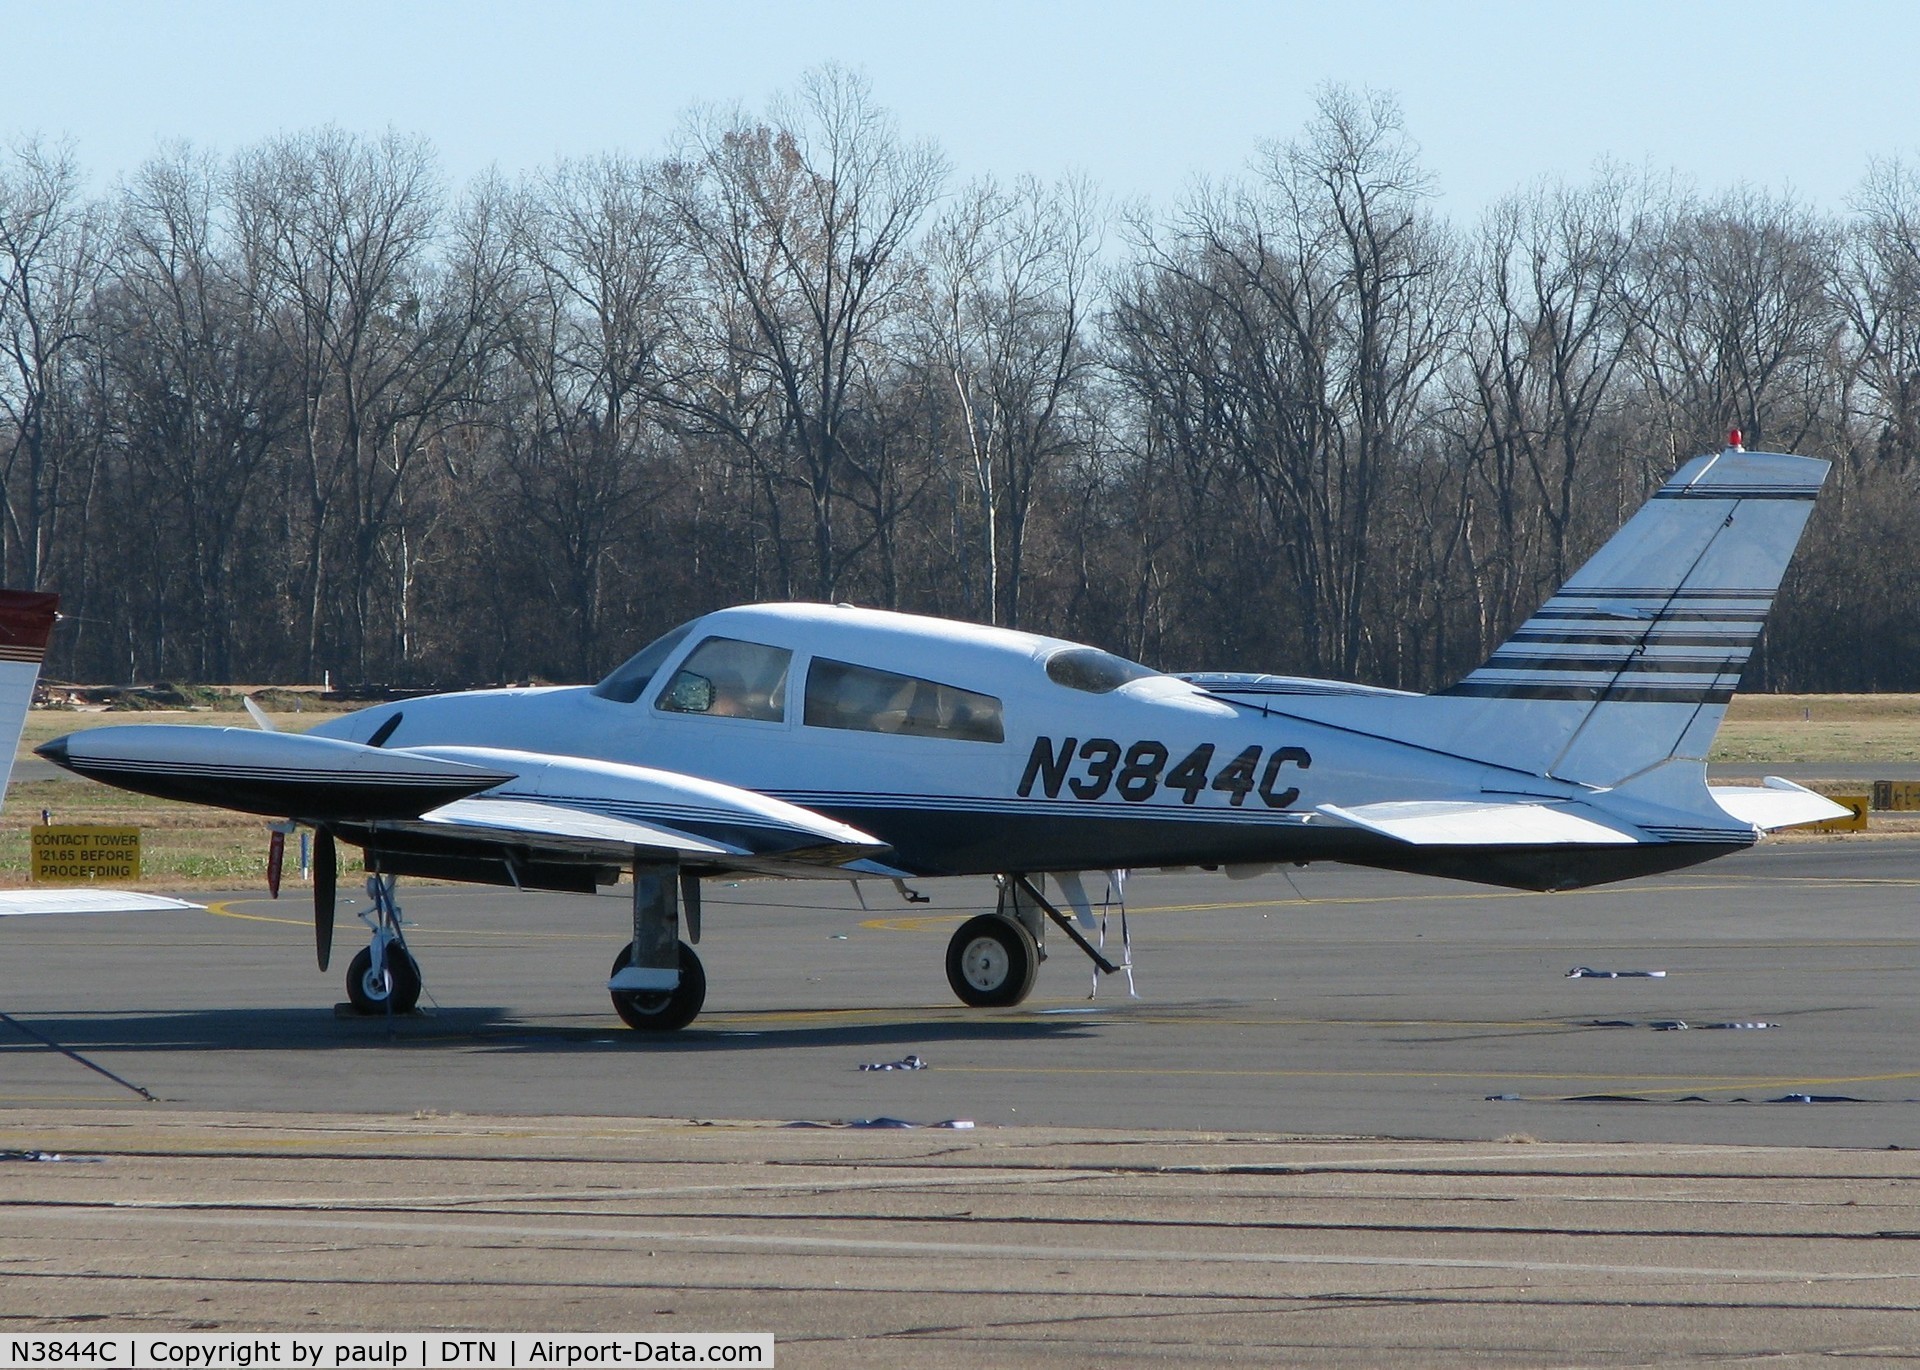 N3844C, 1977 Cessna 310R C/N 310R1238, Parked at Downtown Shreveport.